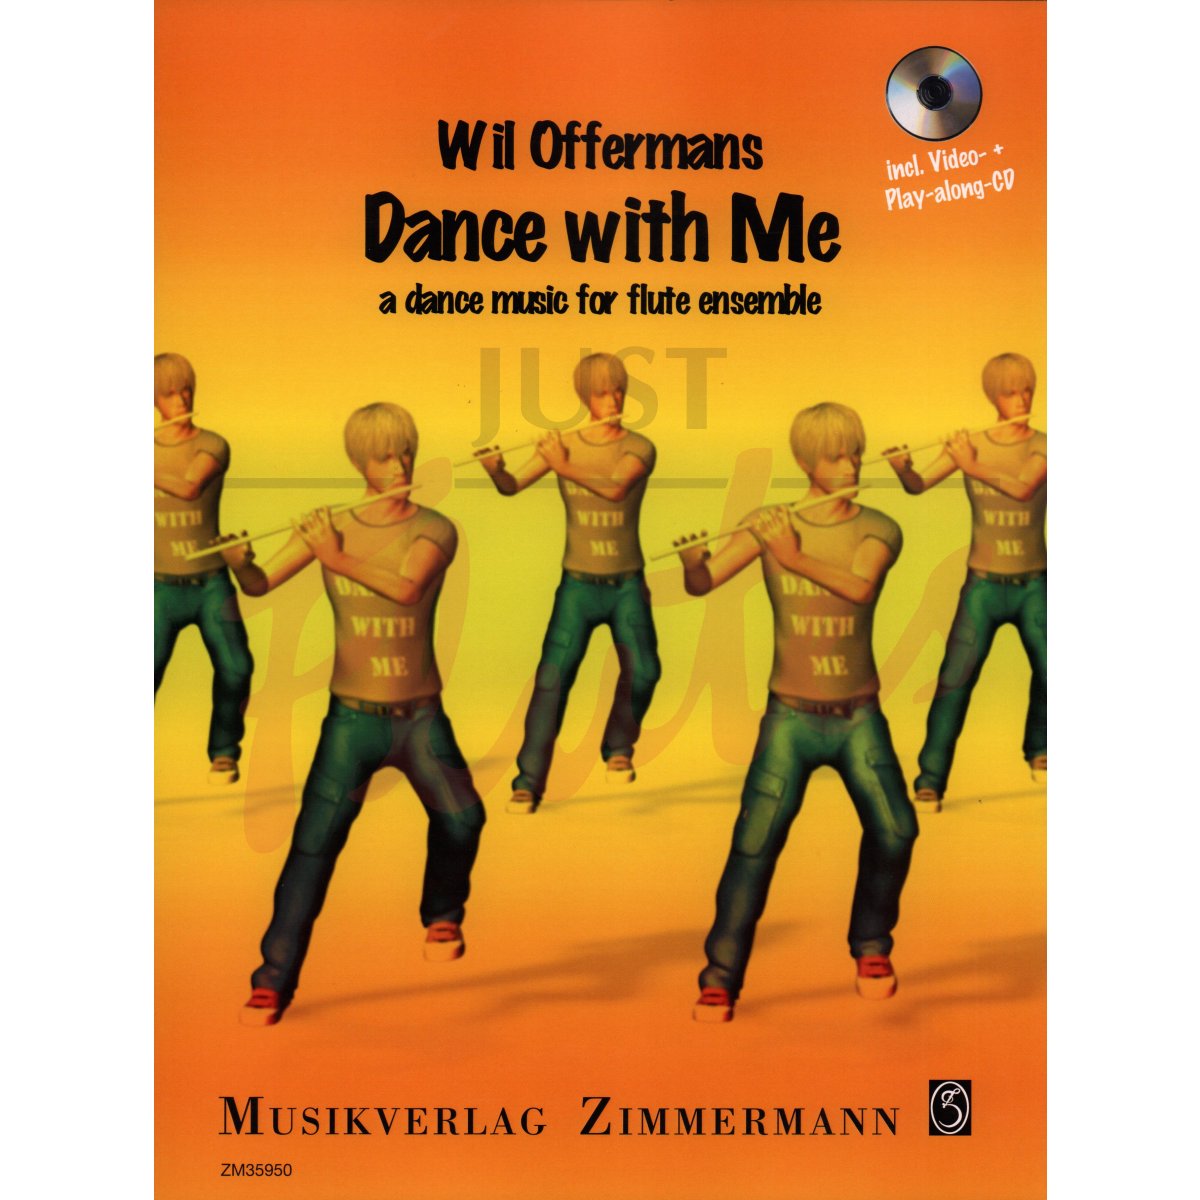 Dance With Me: A Dance Music for Flute Ensemble